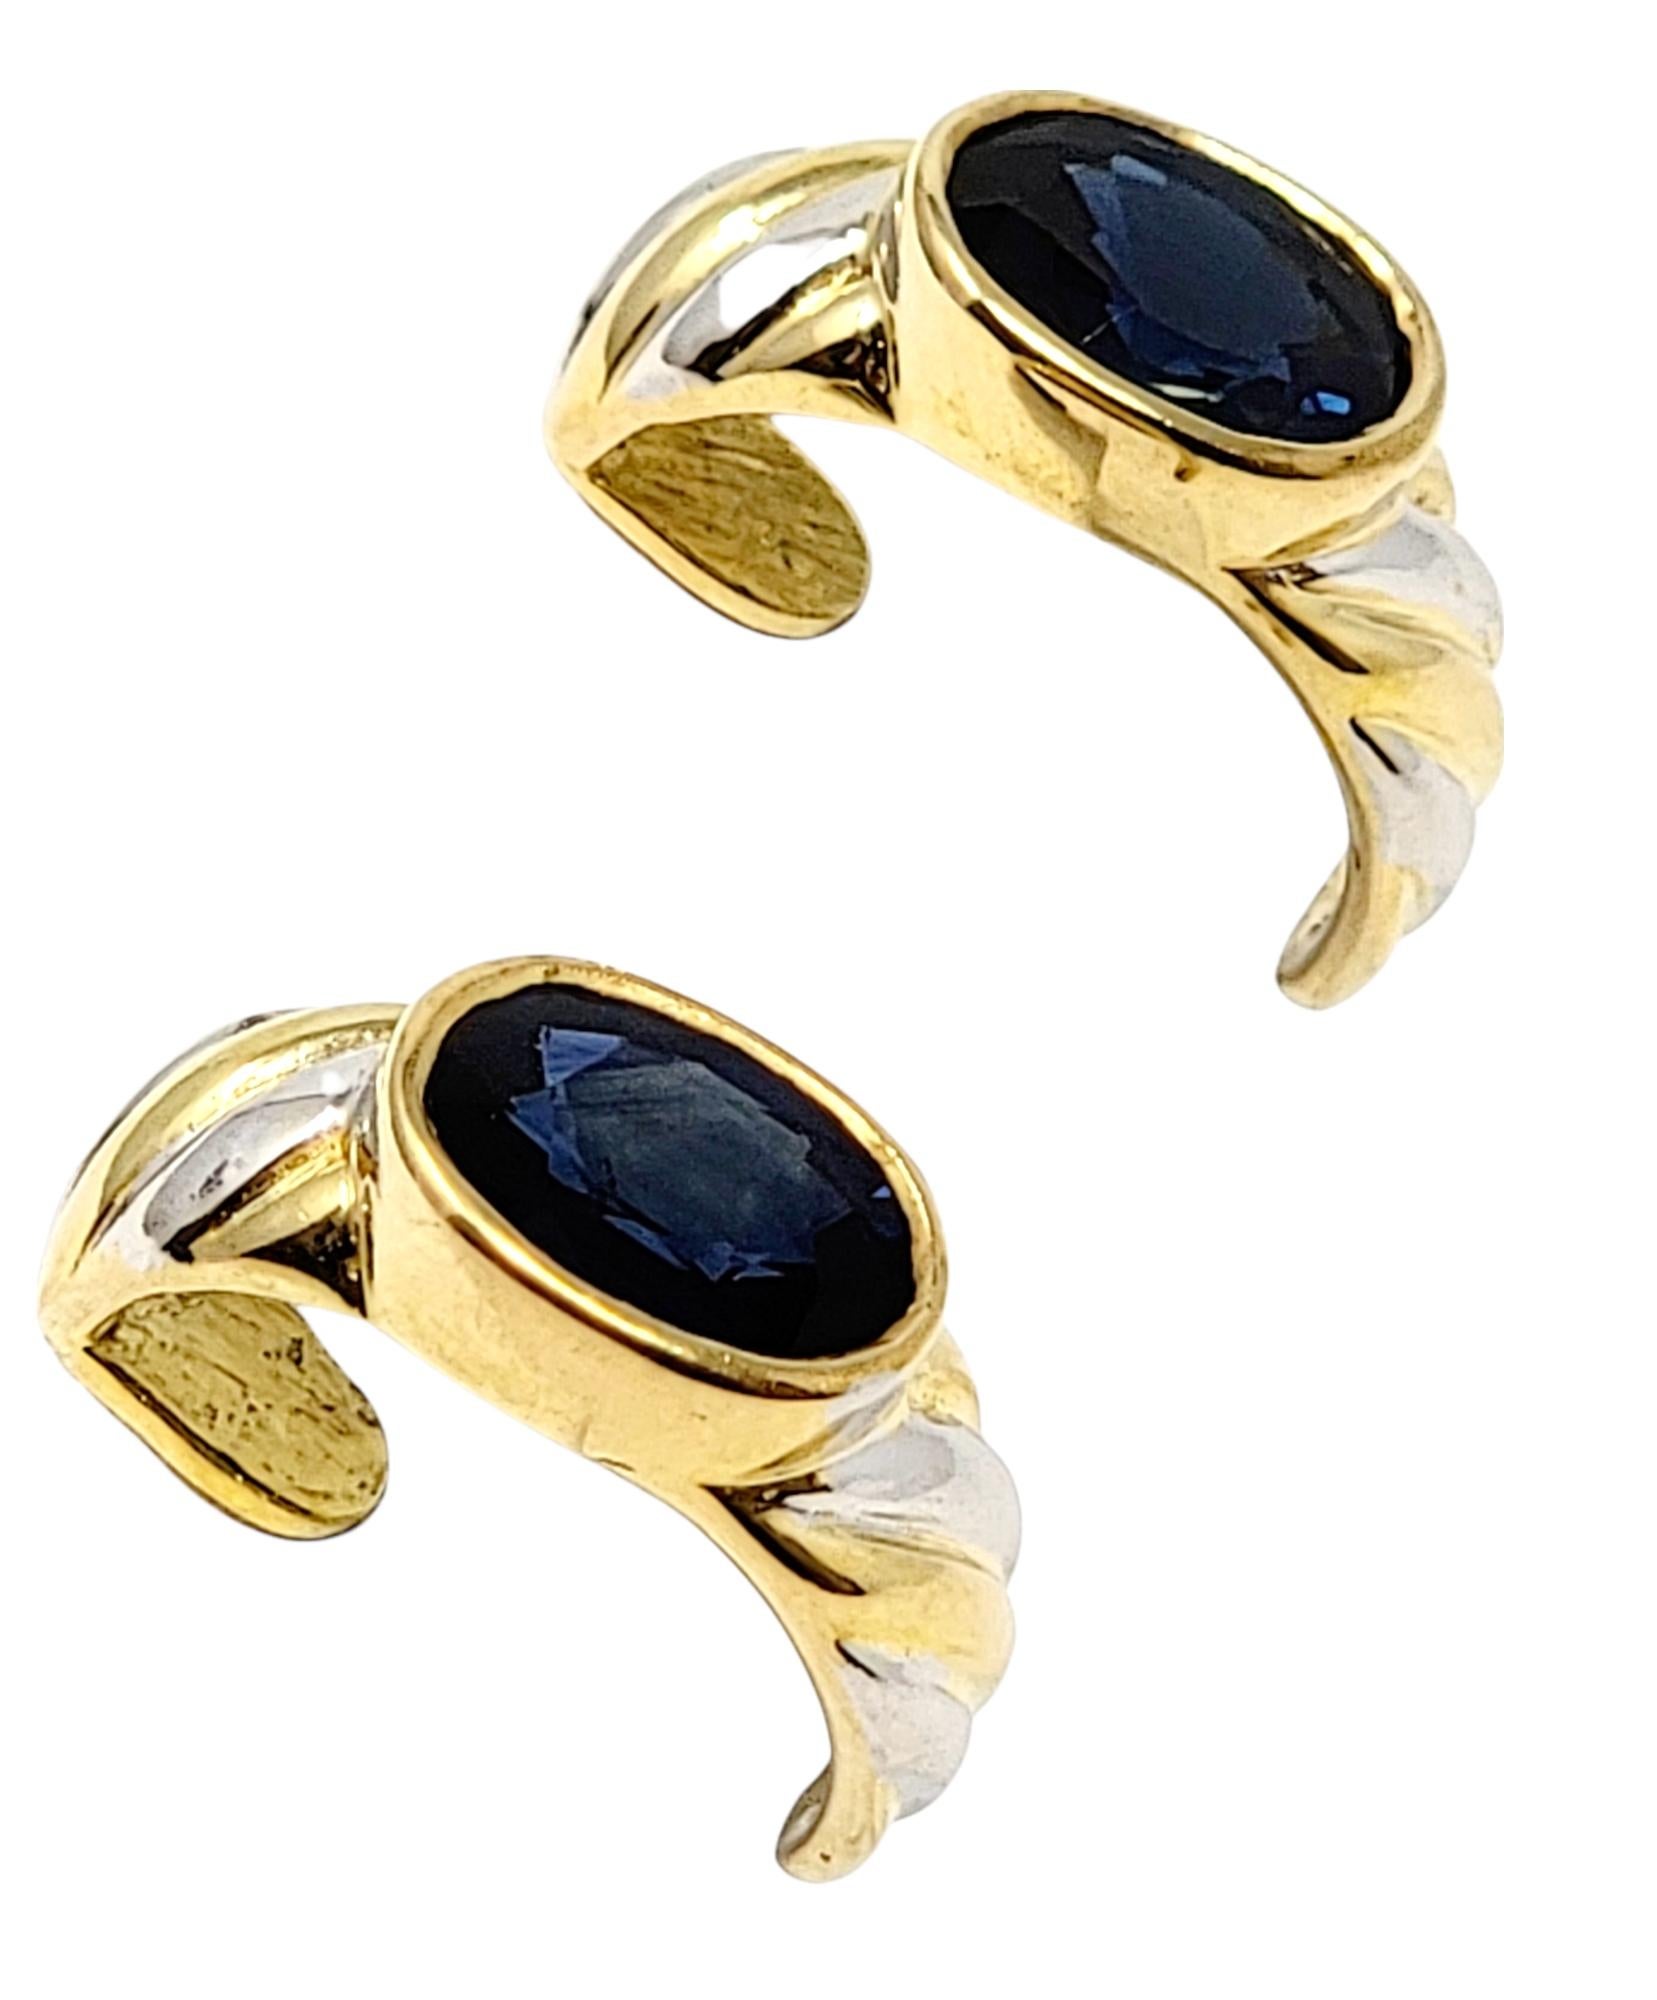 Oval Cut Sapphire Half-Hoop Twist Earrings in 18 Karat Yellow and White Gold In Good Condition For Sale In Scottsdale, AZ